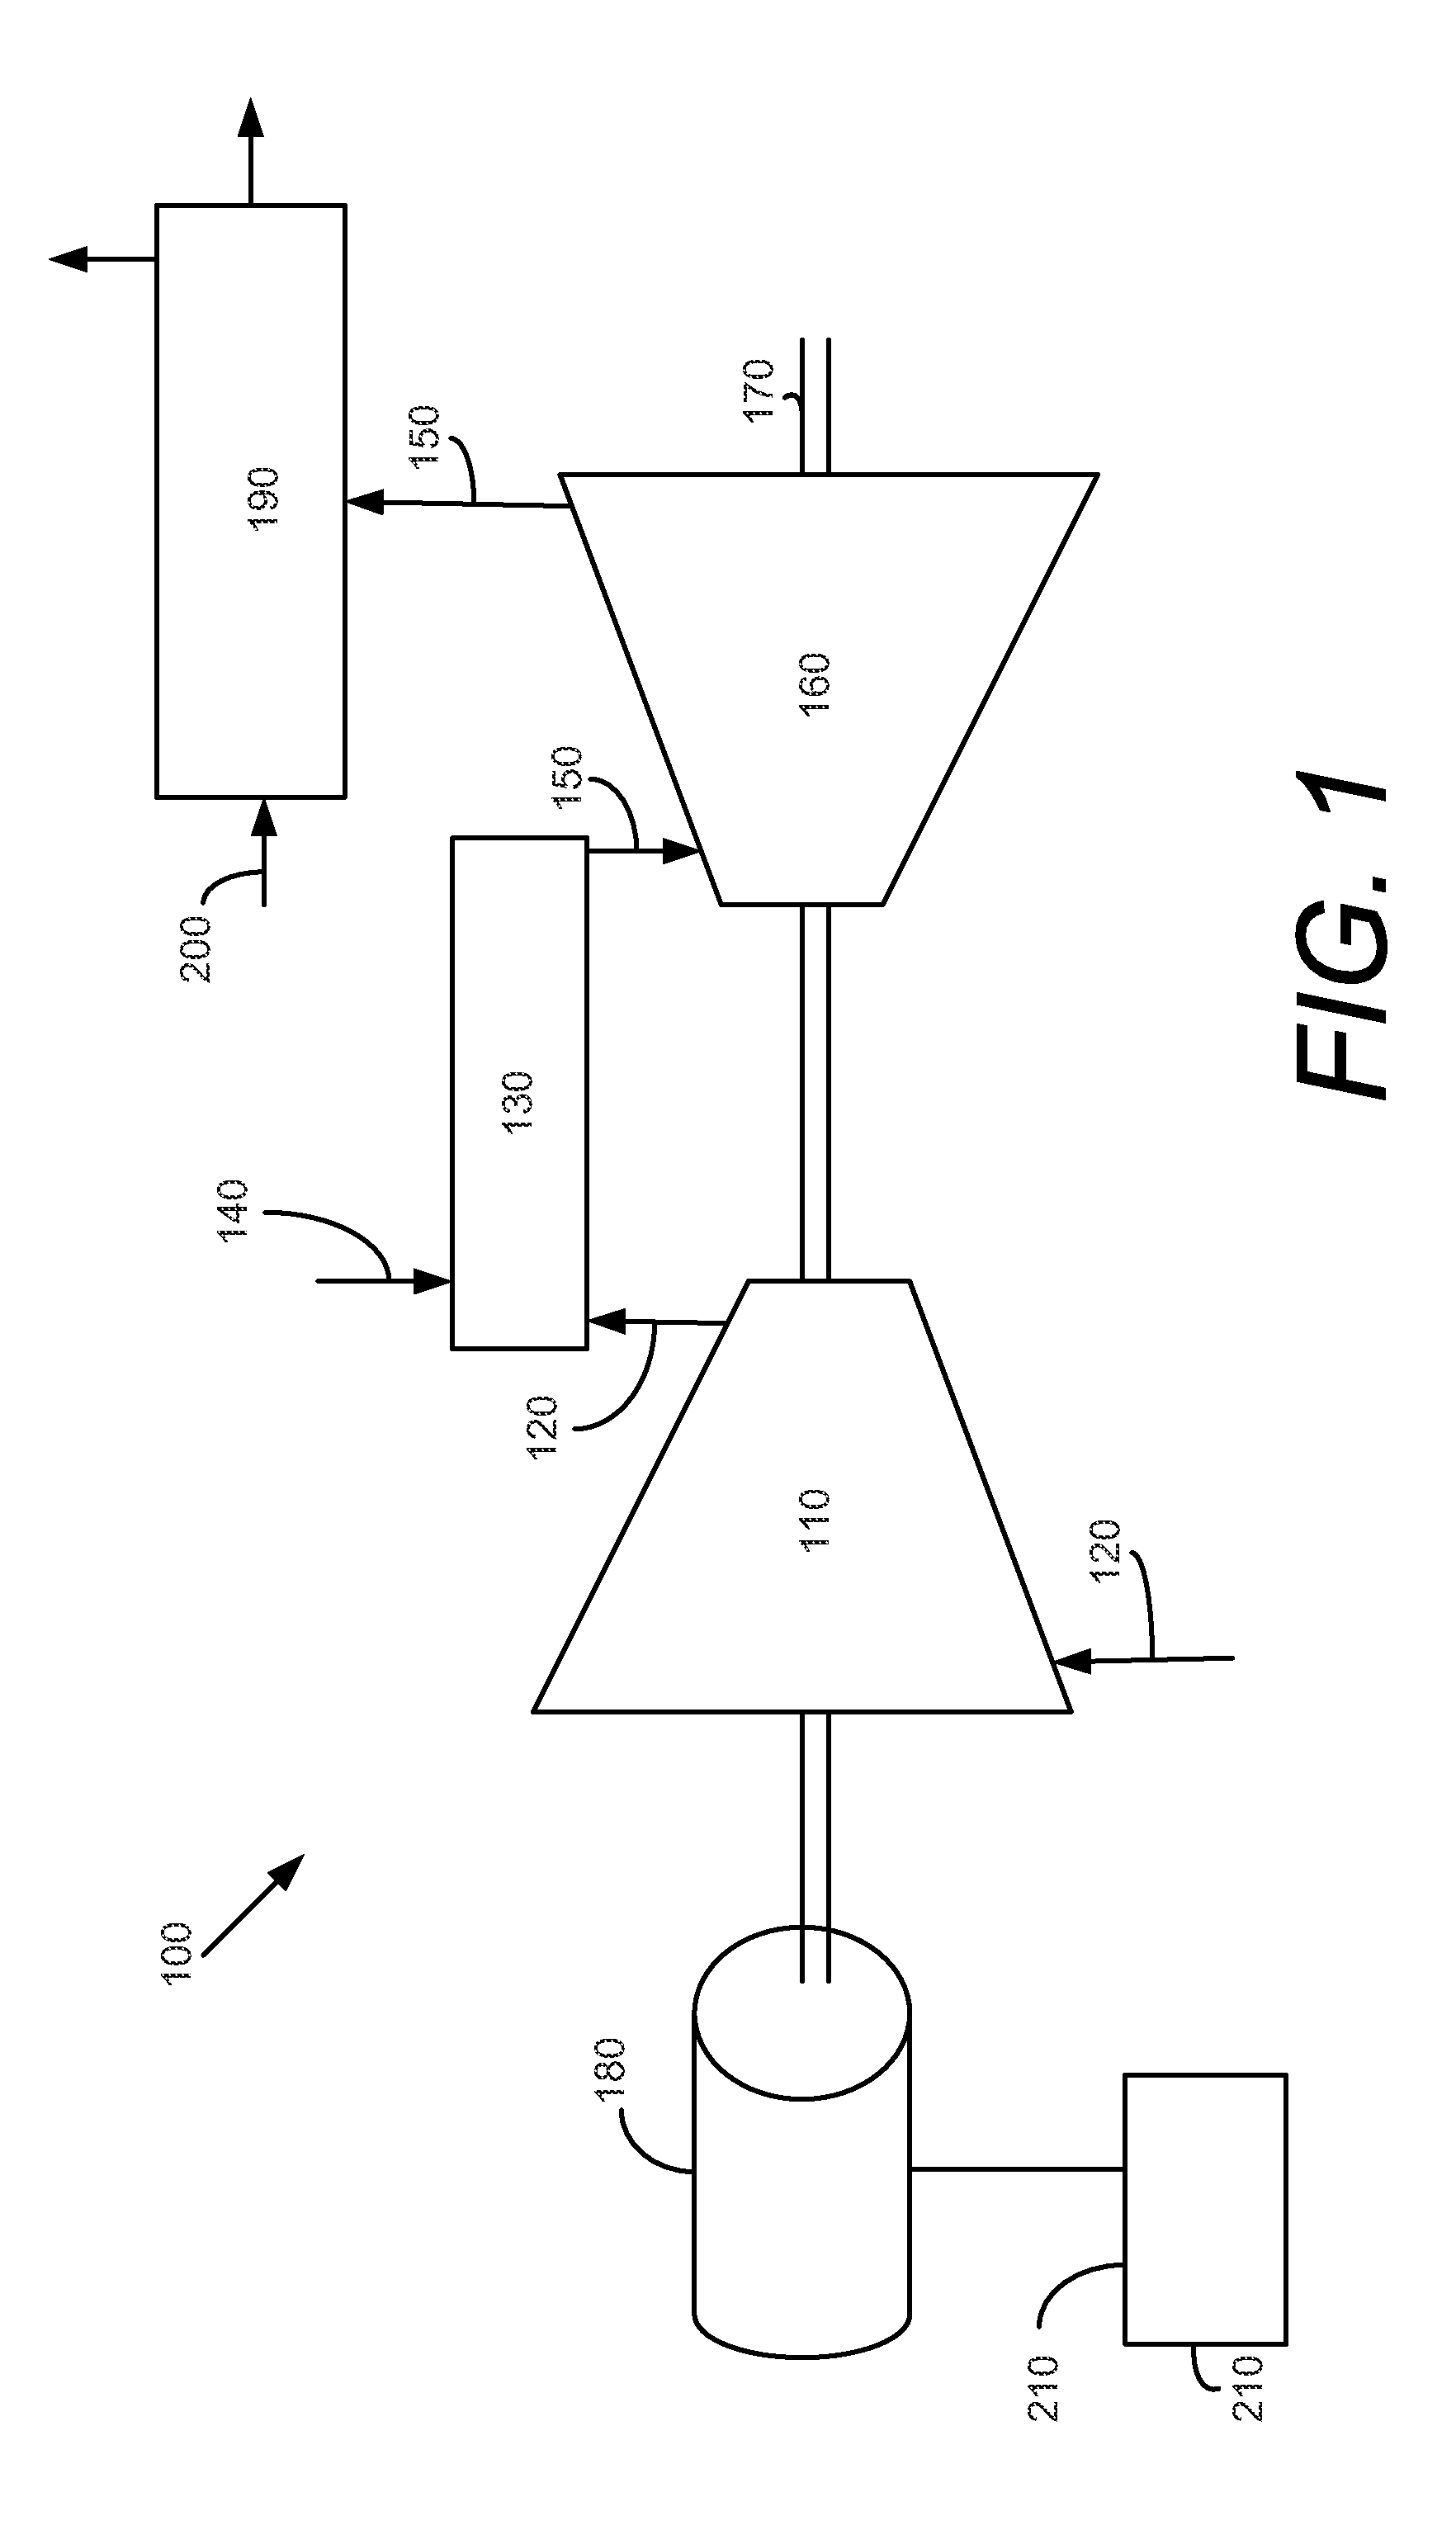 Systems and Methods for Rapid Turbine Deceleration